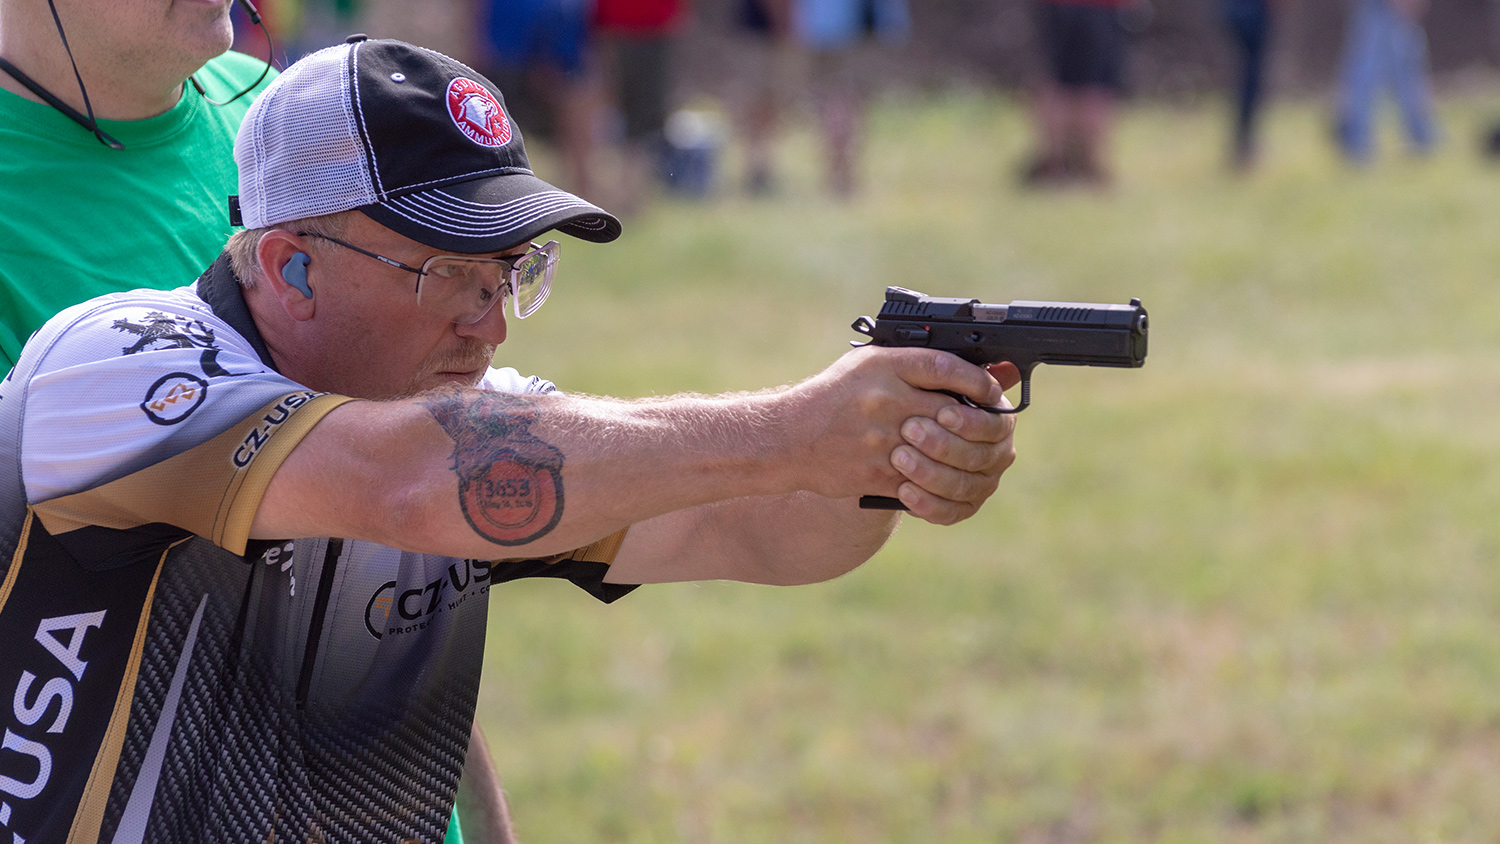 Dave Miller shooting a rimfire pistol at the 2018 Aguila Cup